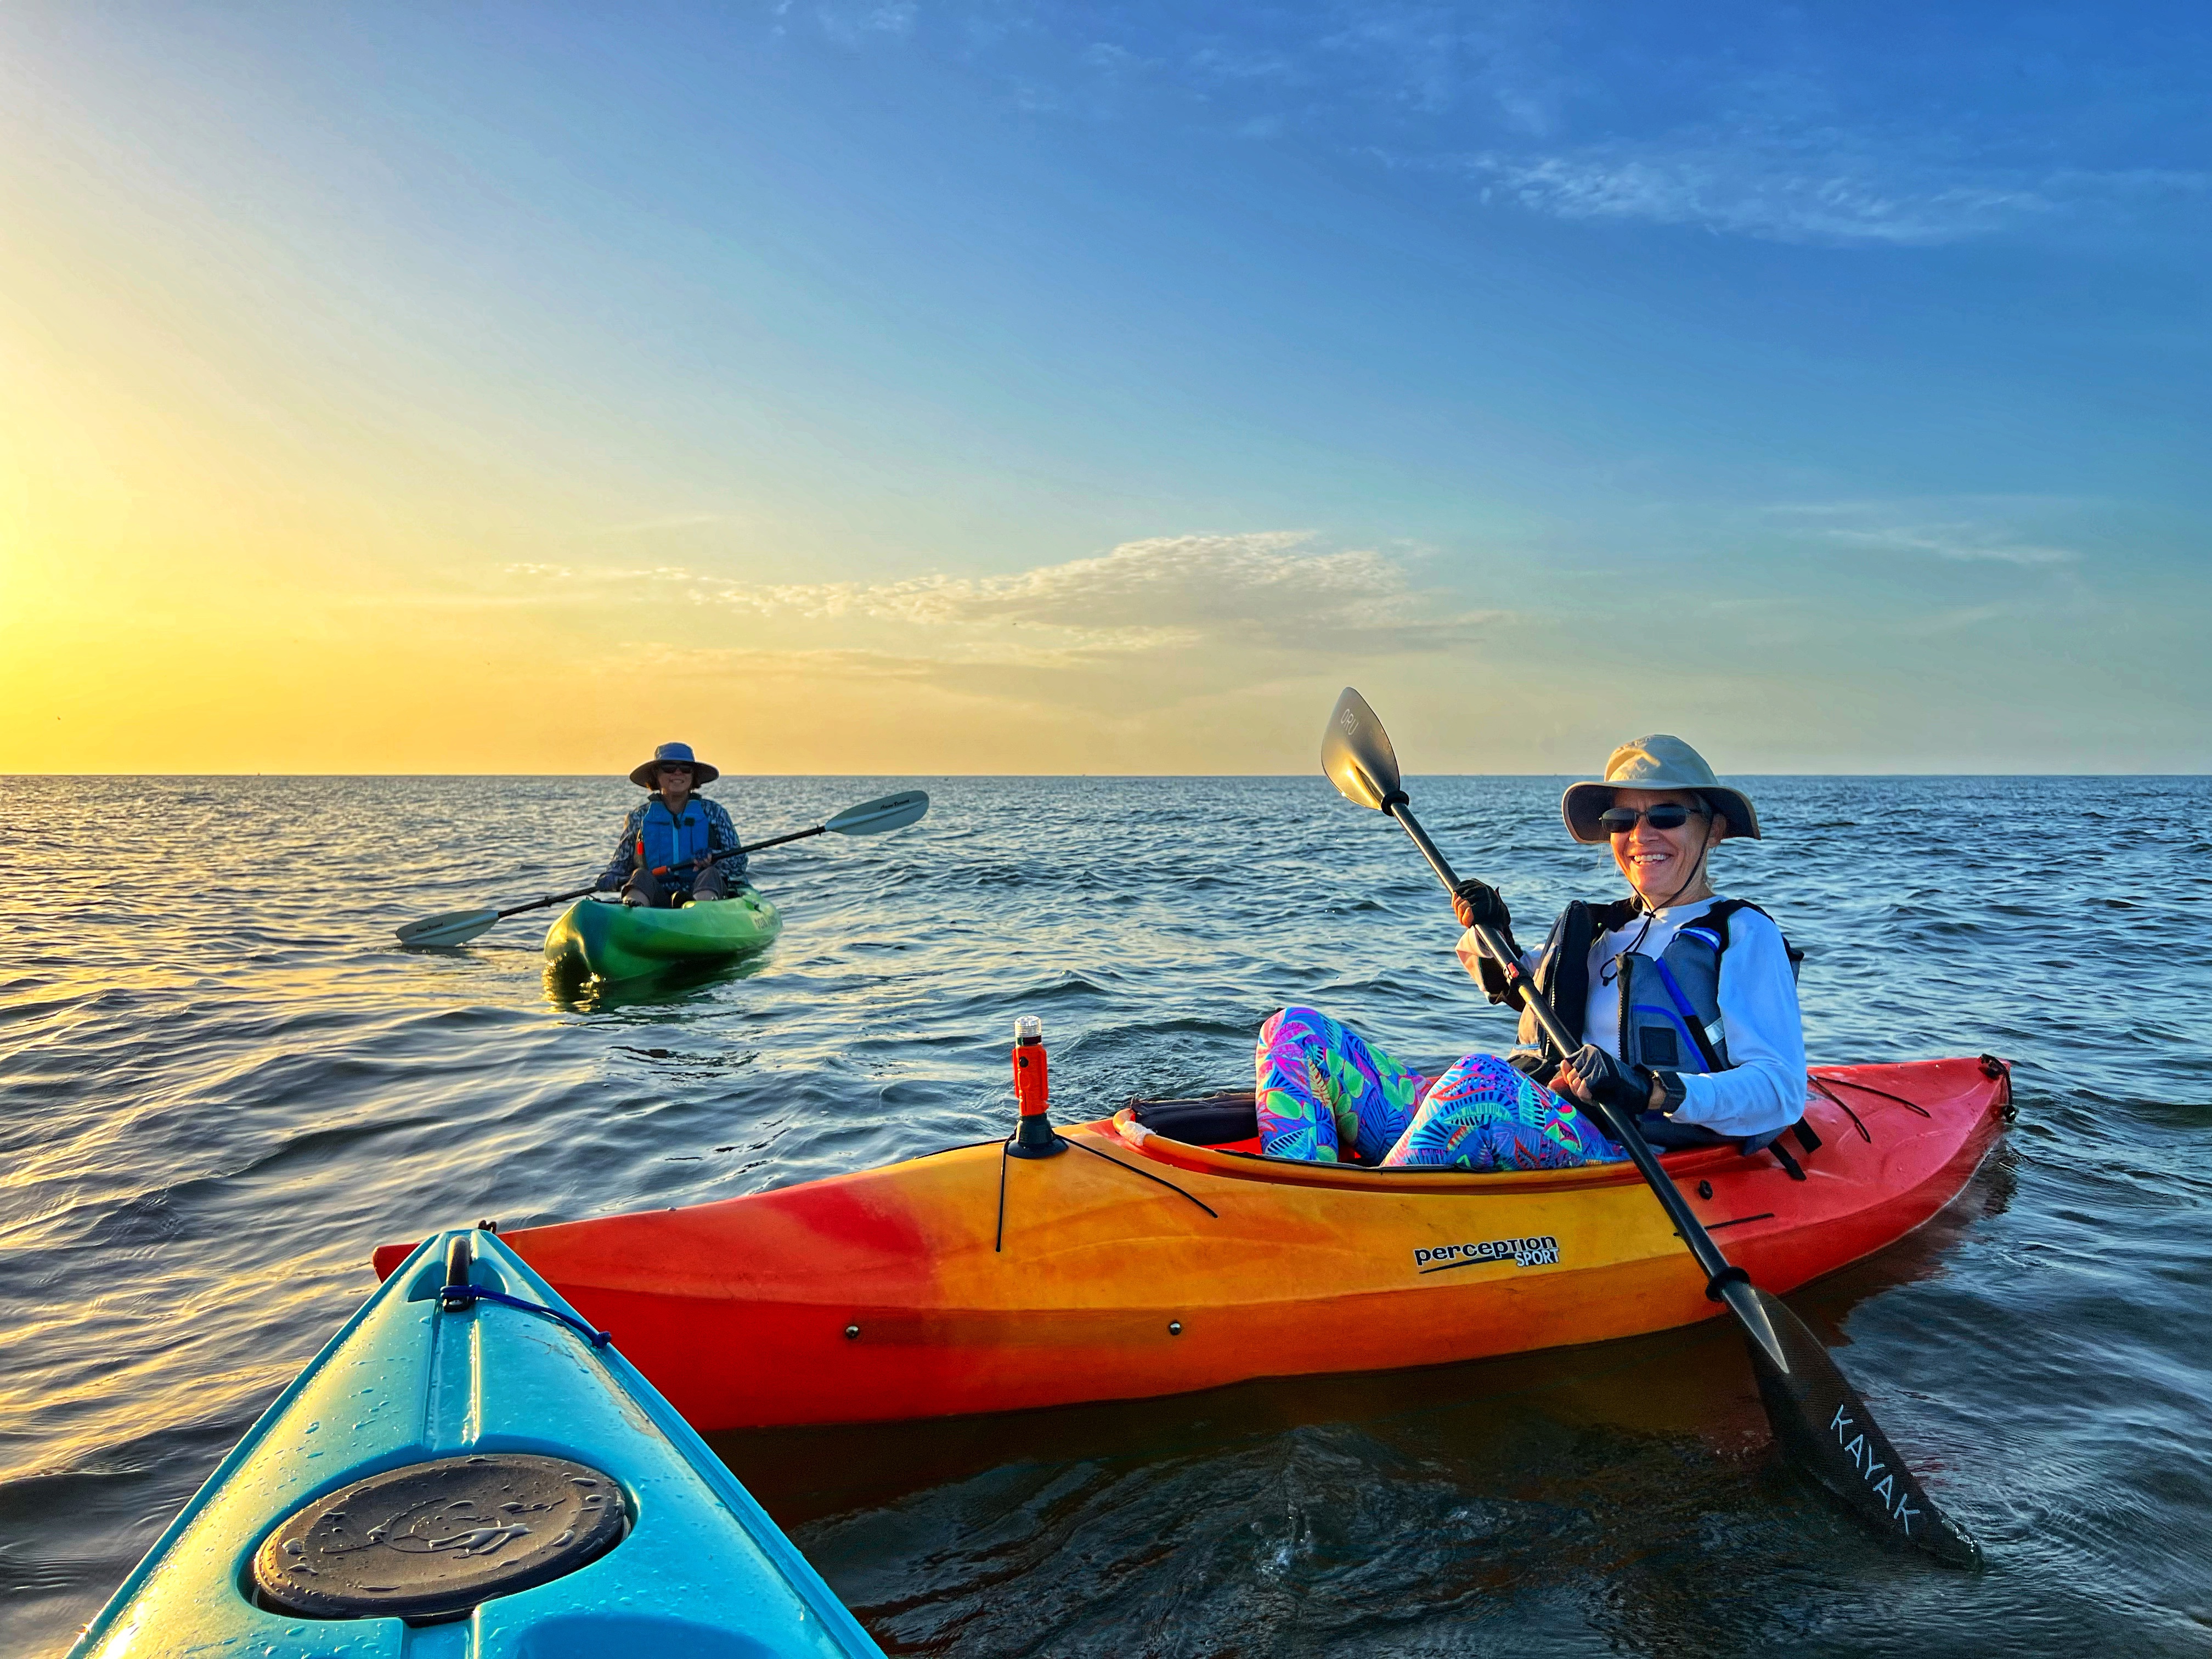 Sunrise at St Lucie Inlet Ocean Paddle